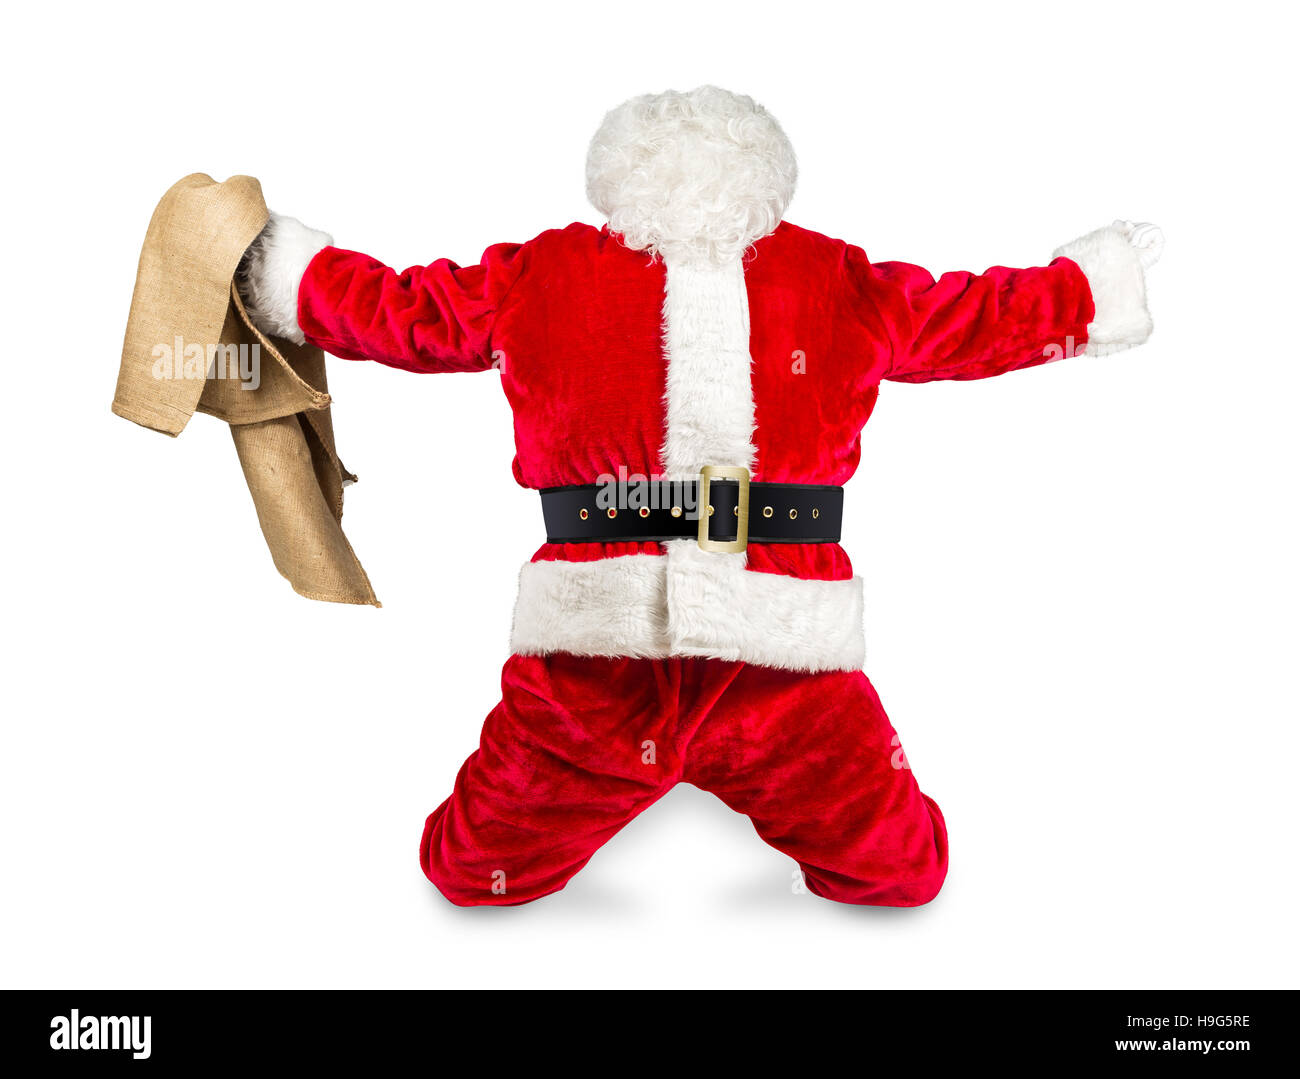 funny crazy hilarious red white santa claus celebration clench fist holding bag in the air job done isolated on white background Stock Photo